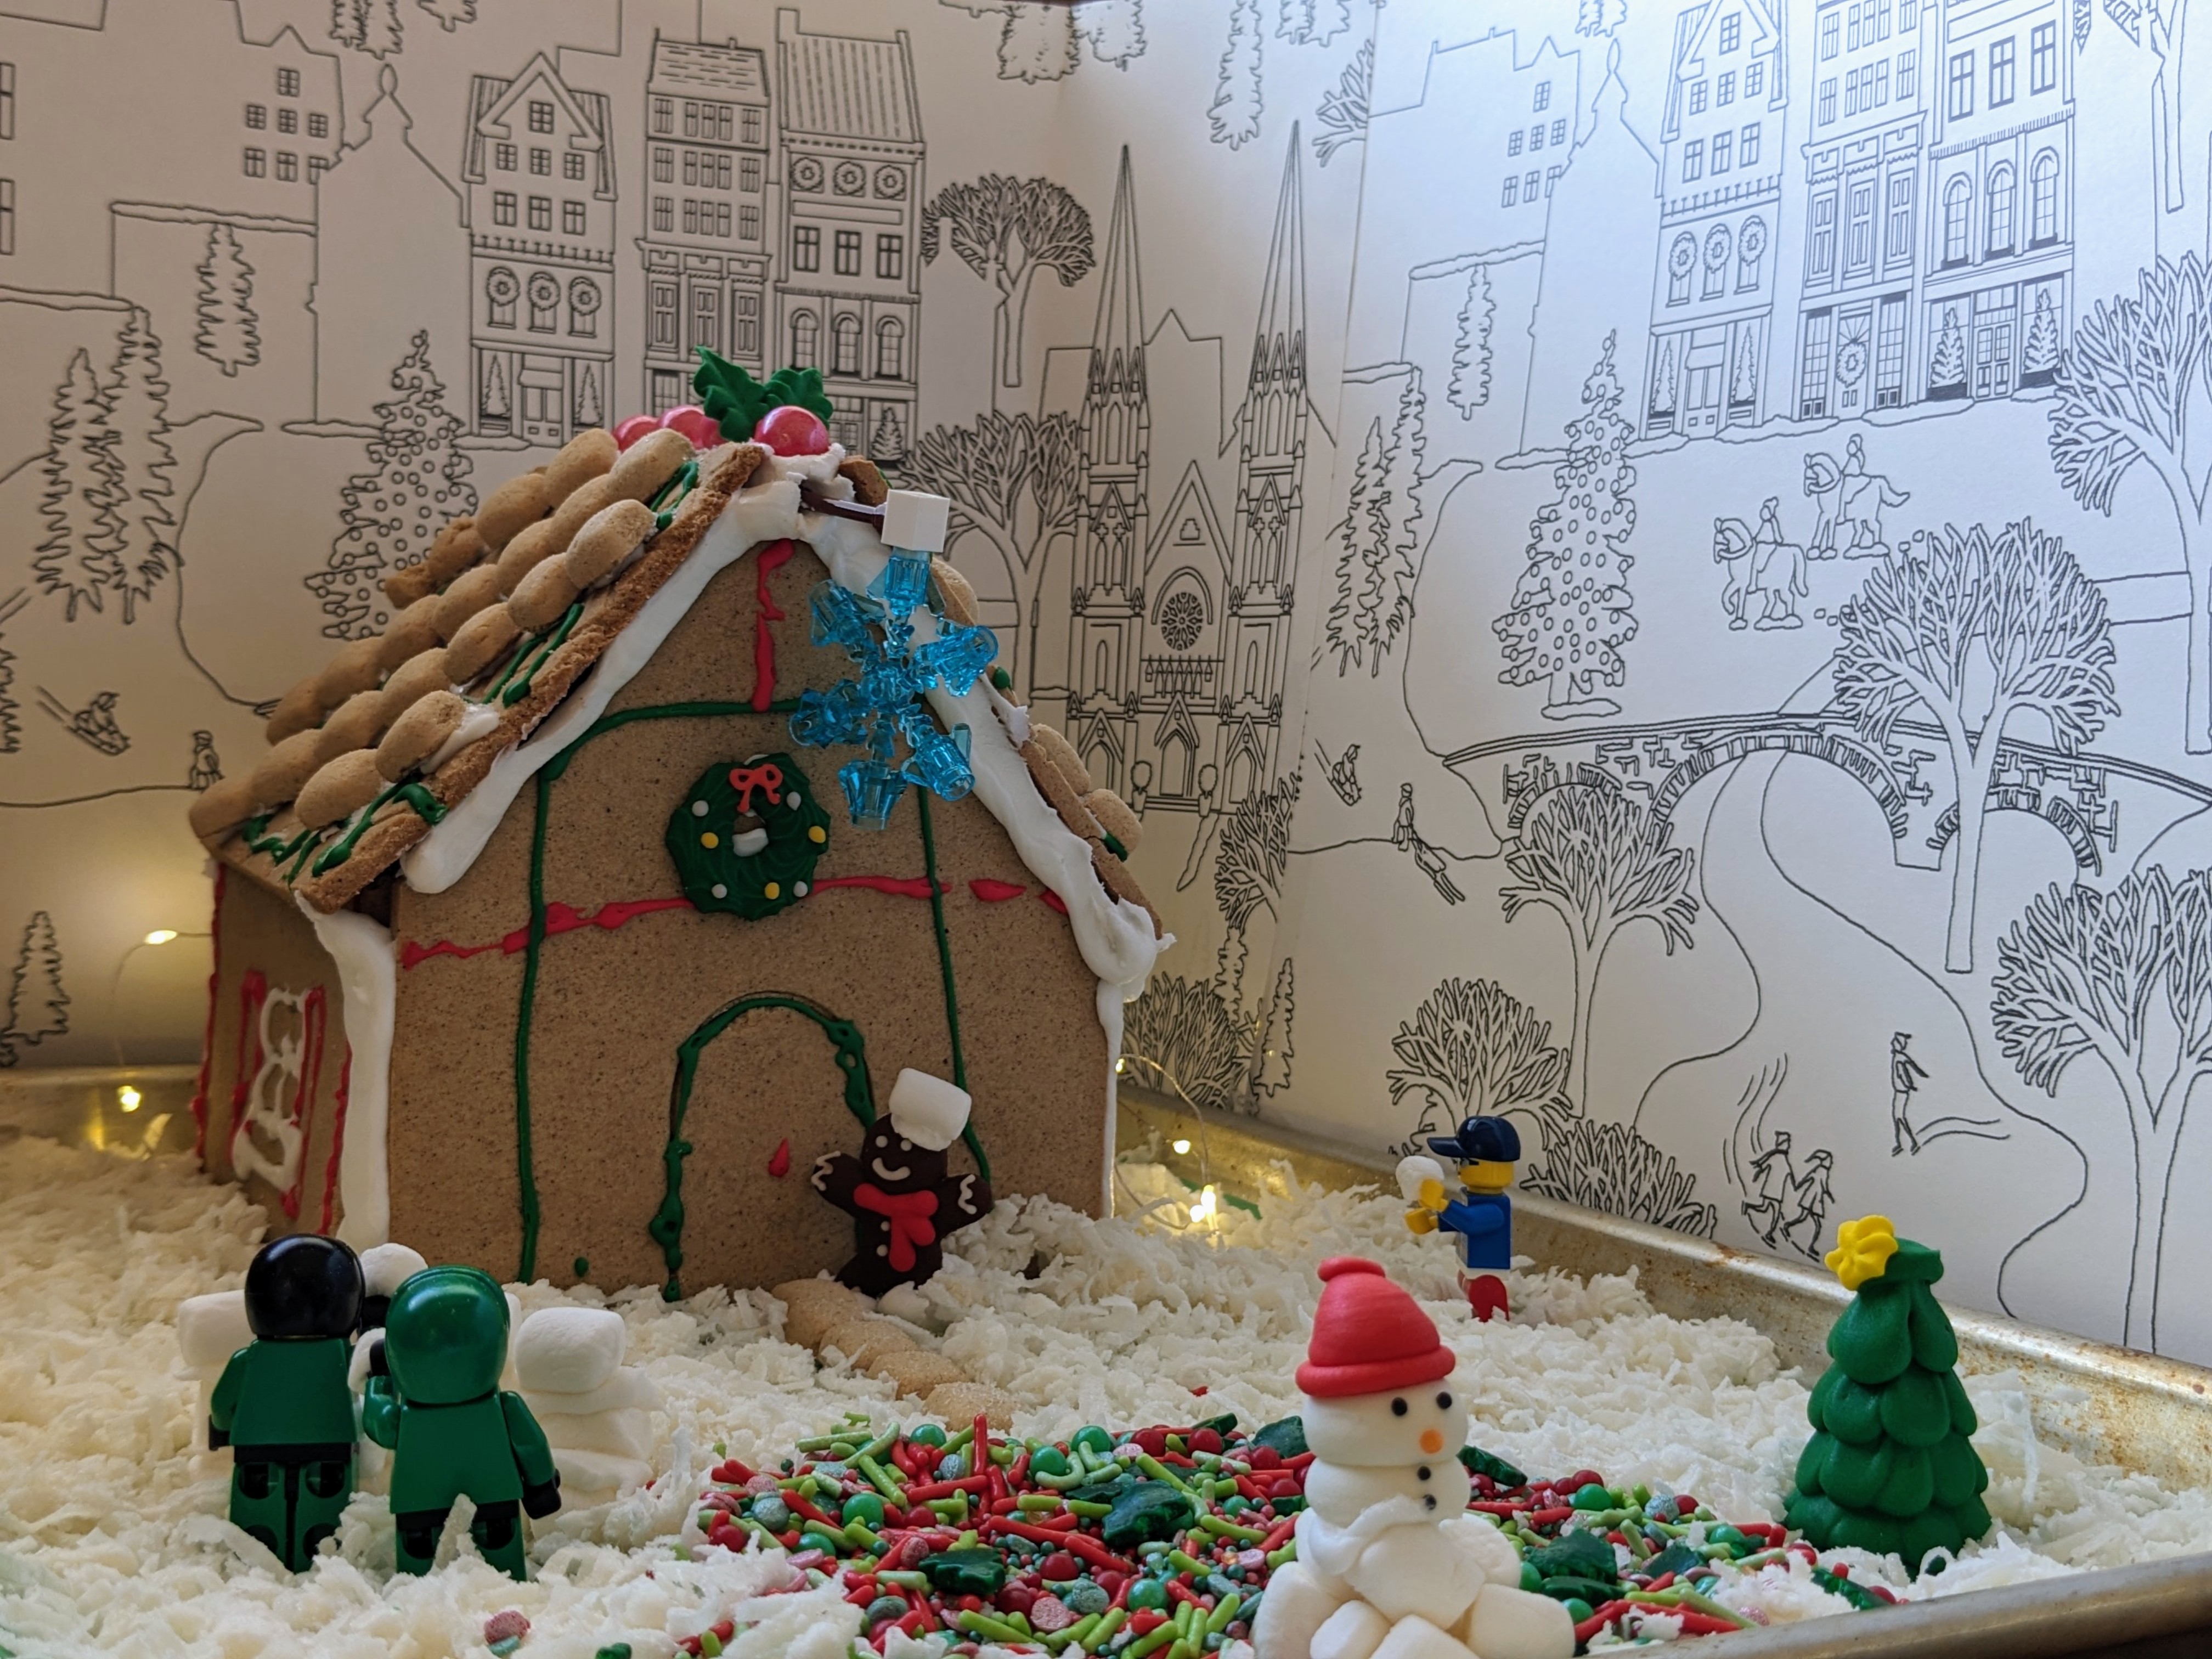 A gingerbread library has people having a snowball fight and a marshmallow snowman.